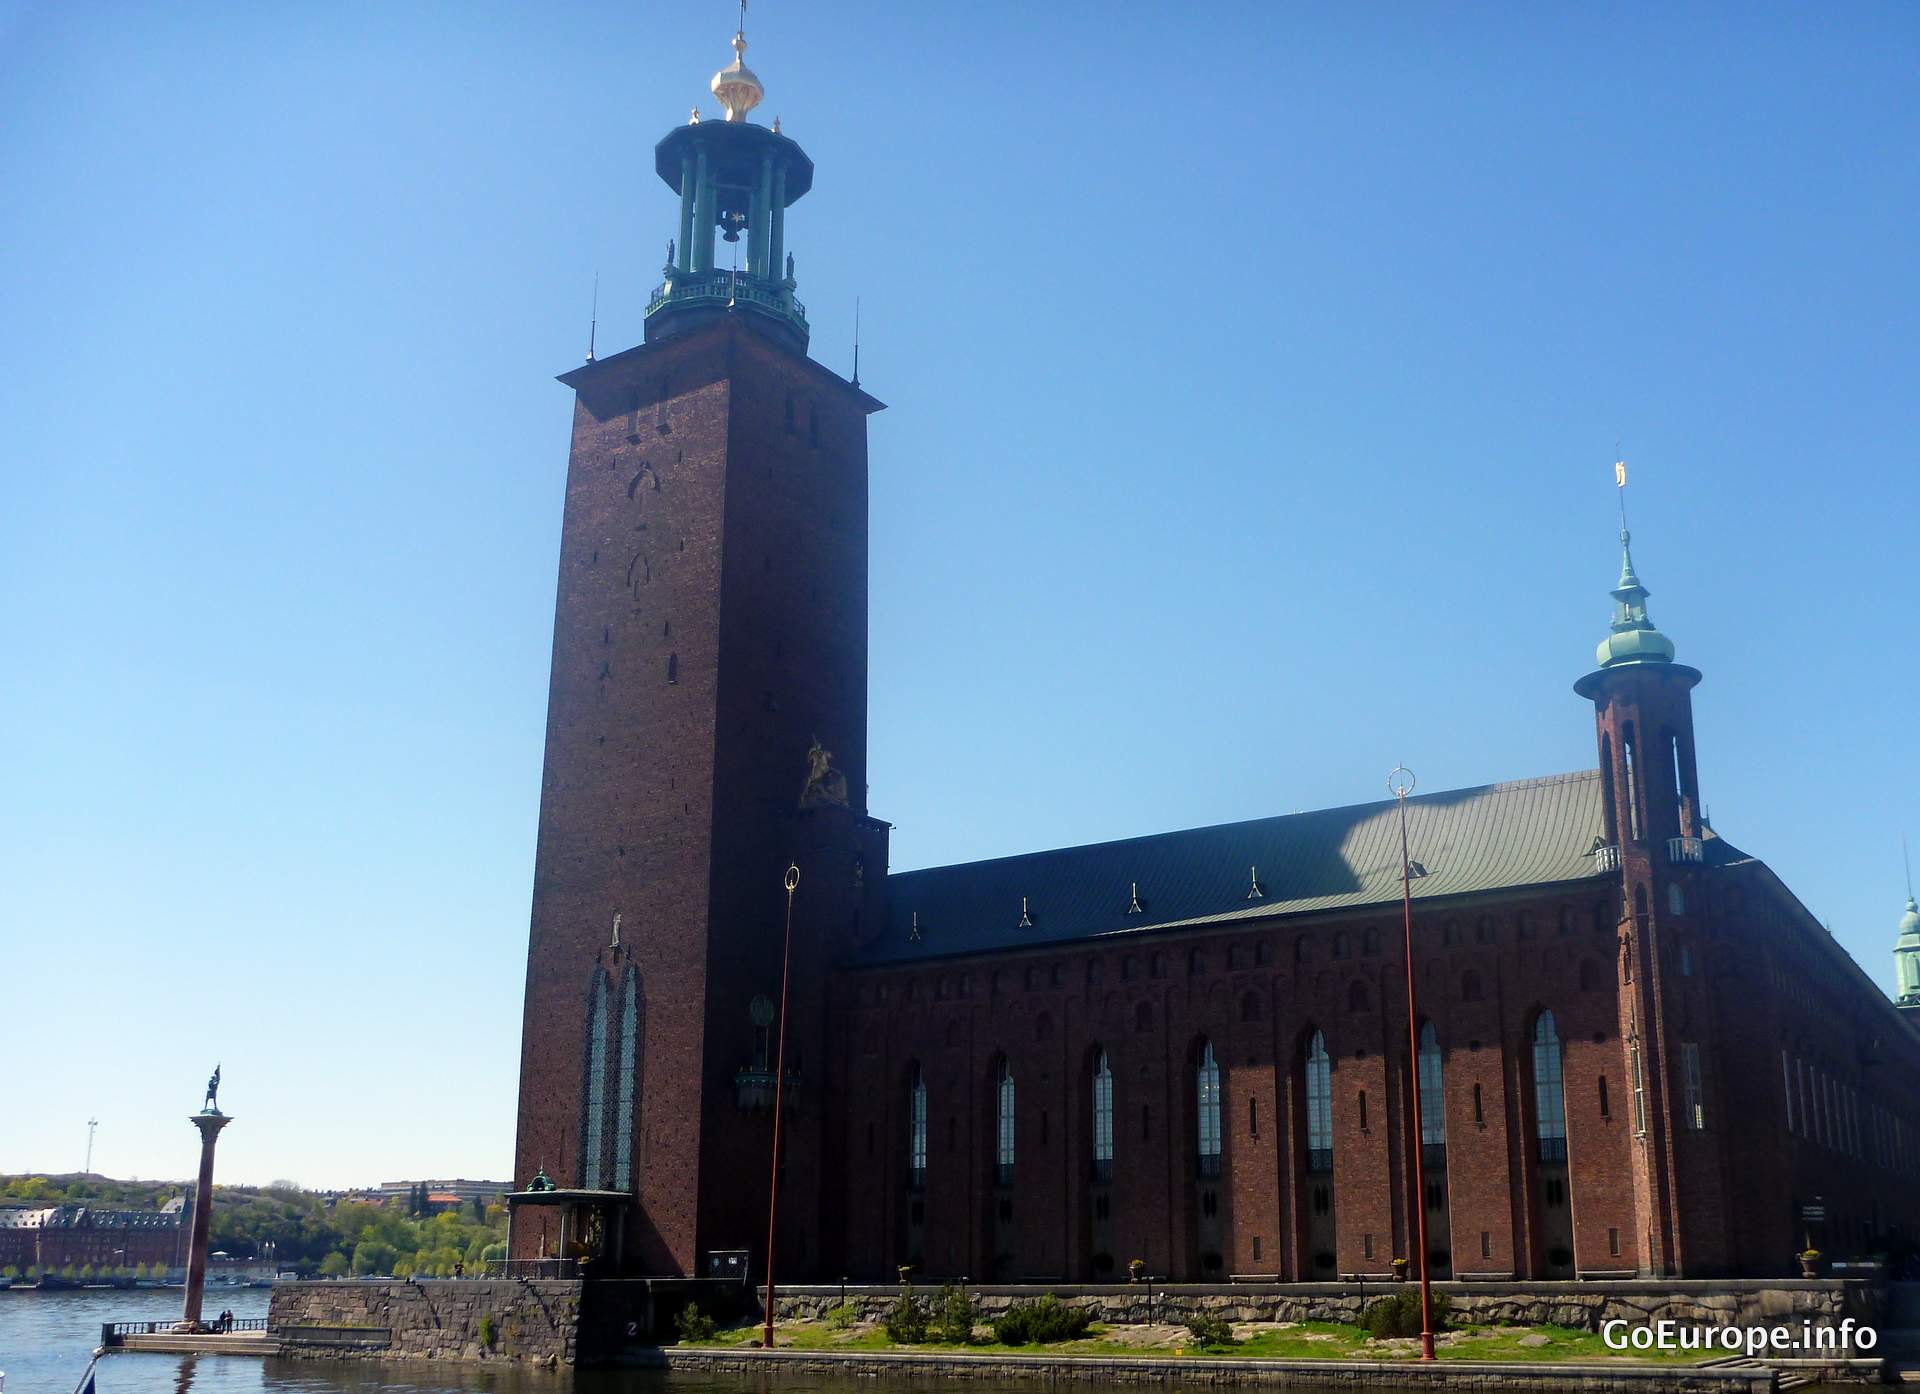 The city hall of Stockholm.